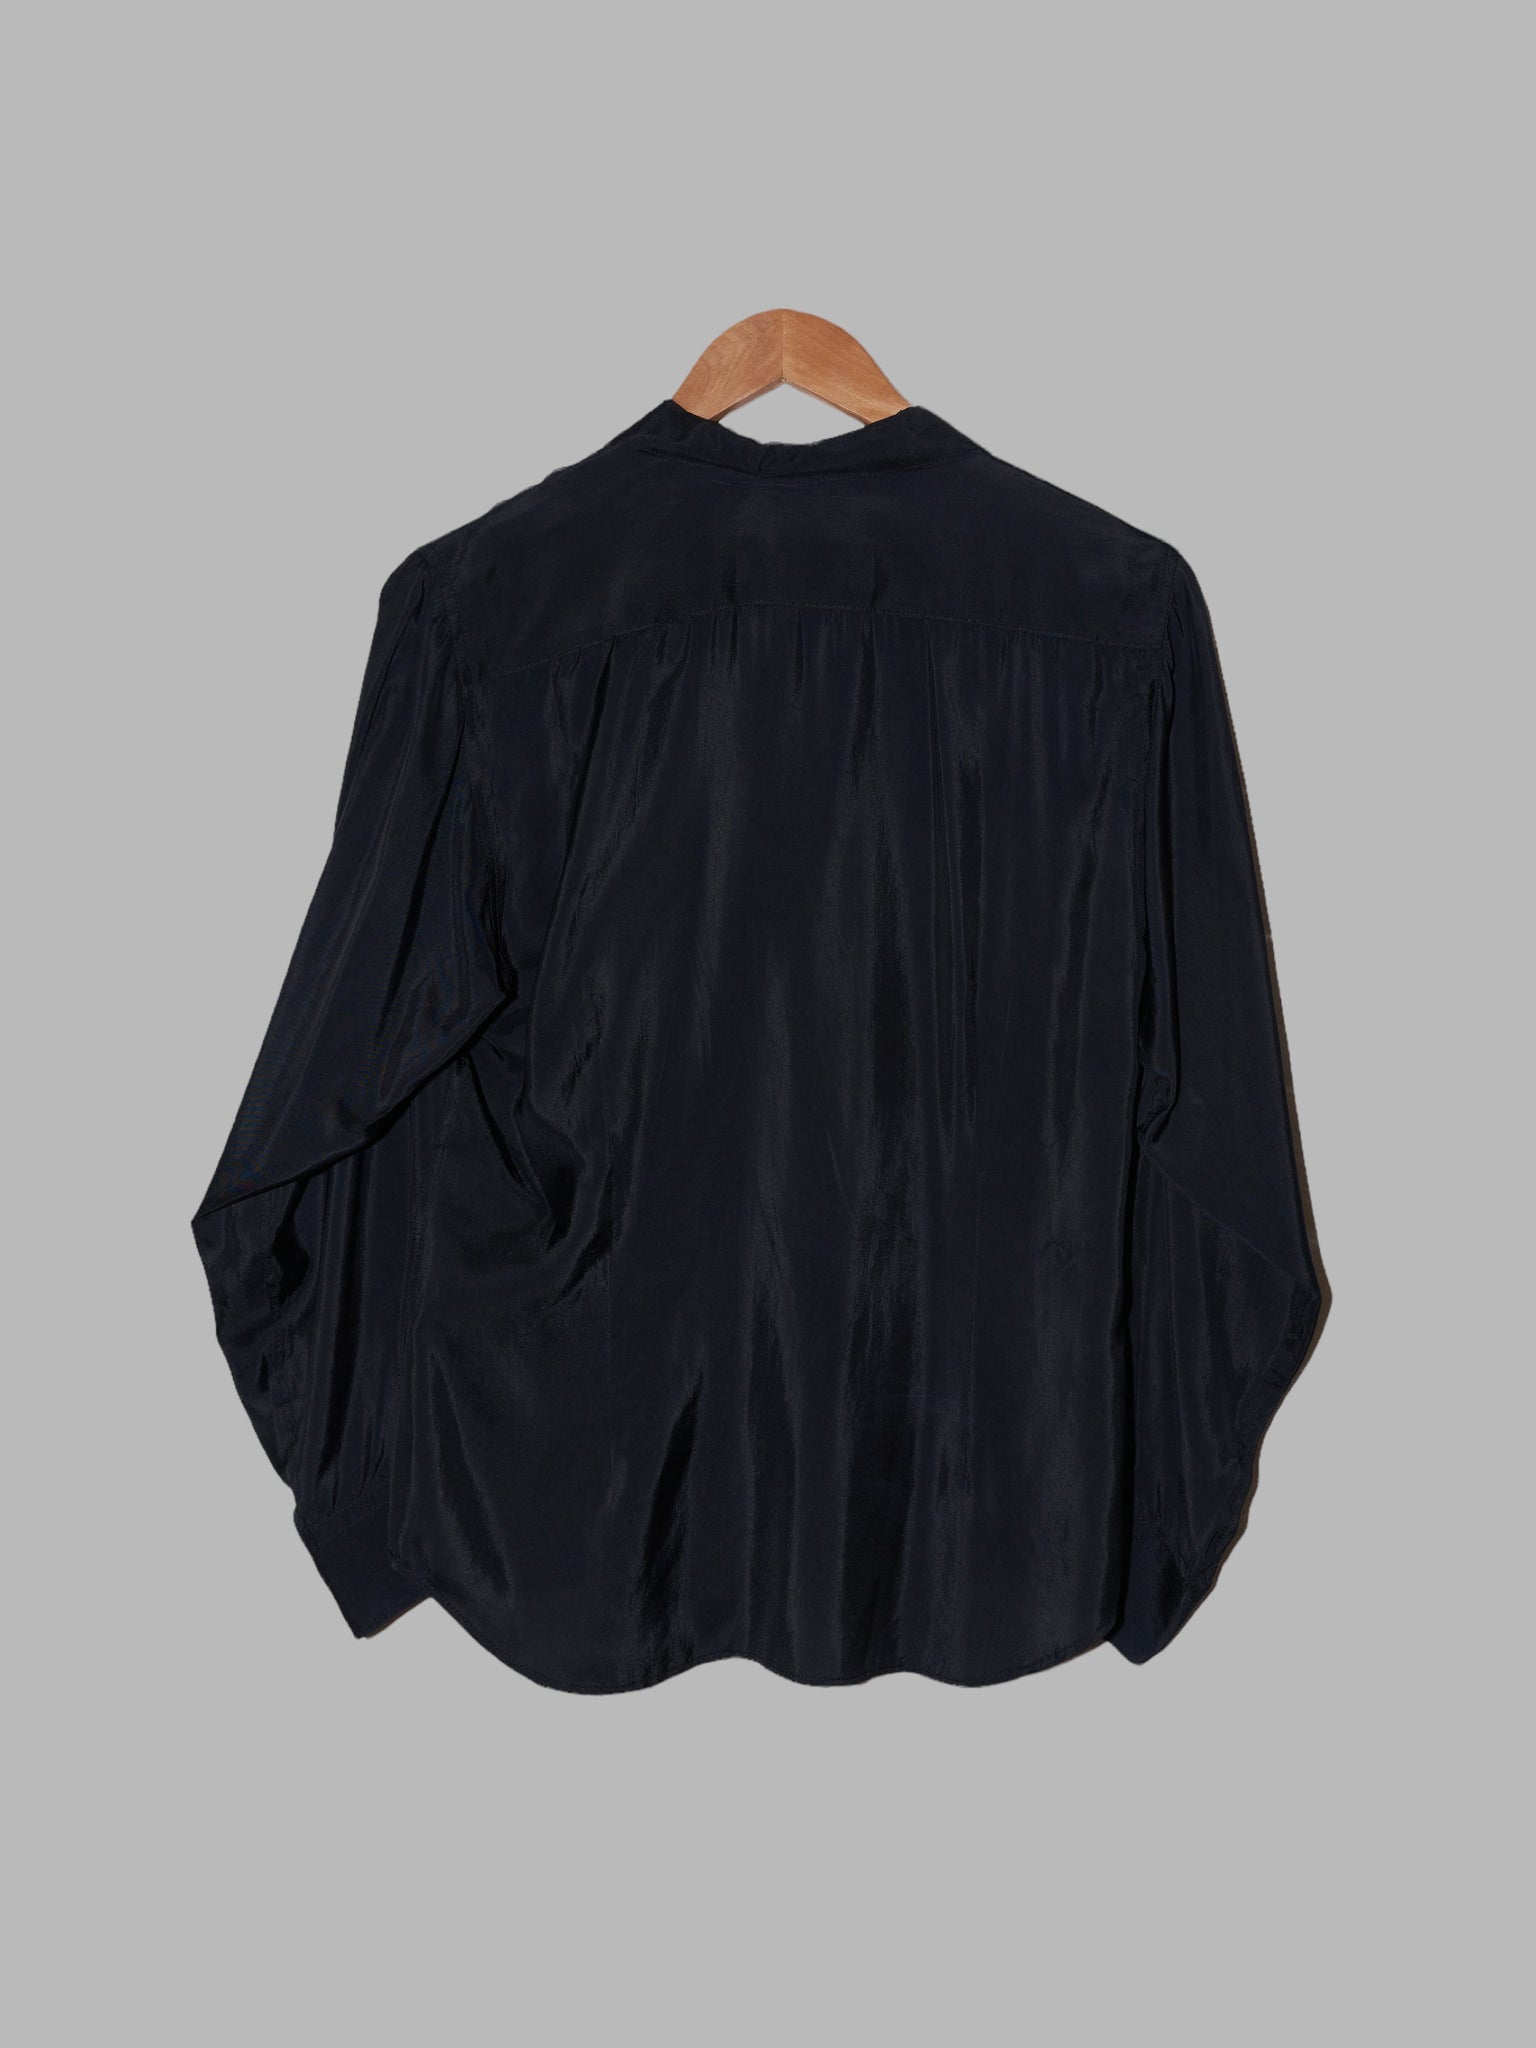 Tricot Comme des Garcons 1980s black satin double breasted blouse